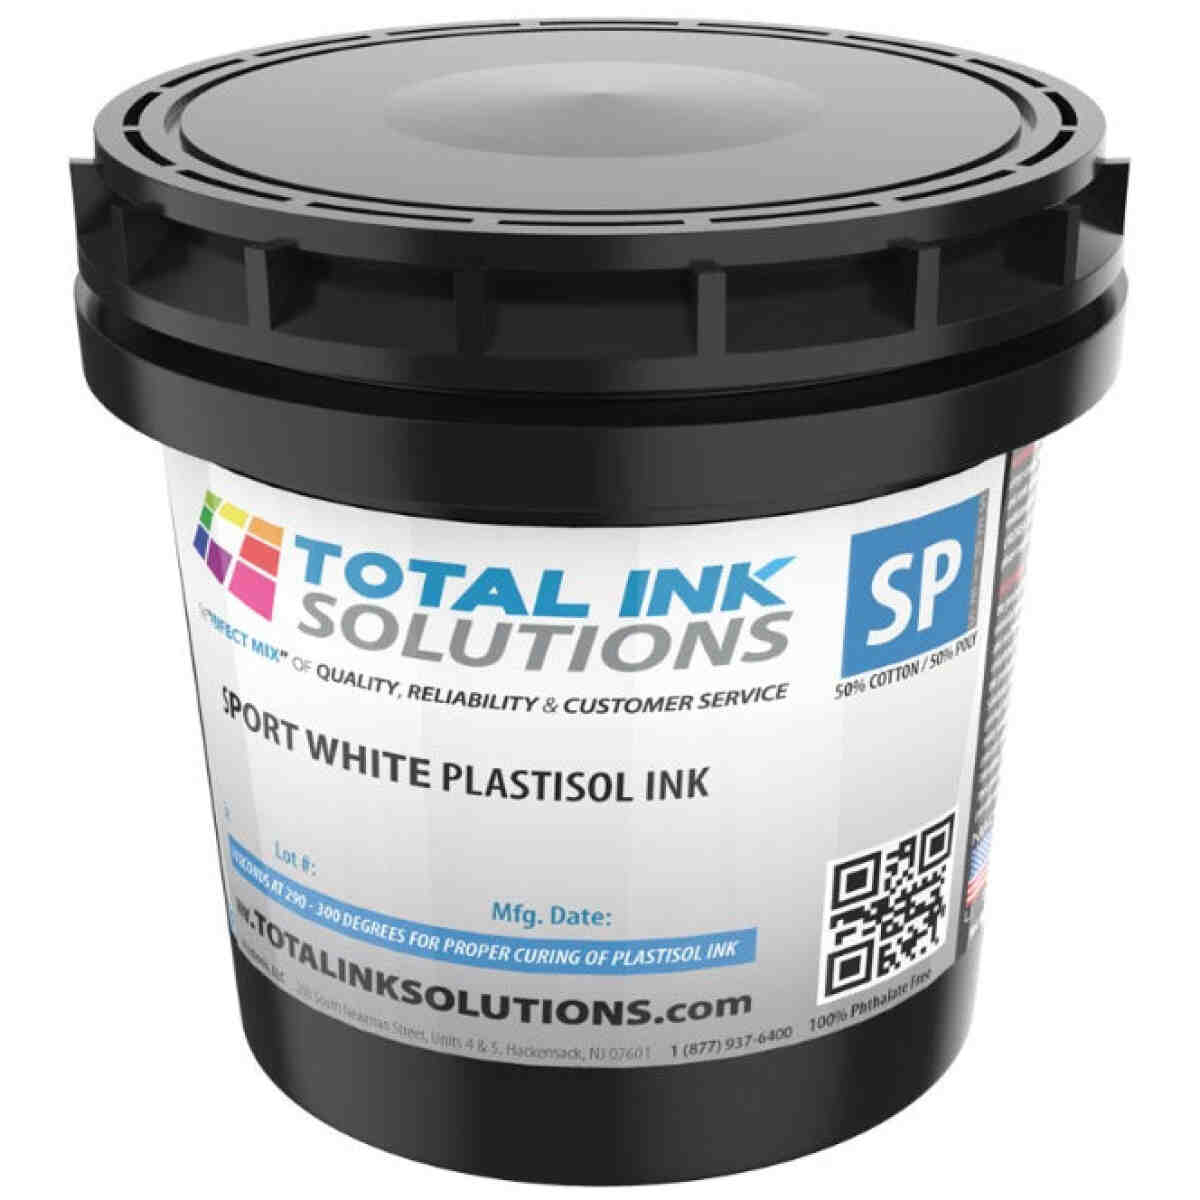 Sport White Plastisol Ink - Pint TOTAL INK SOLUTIONS®